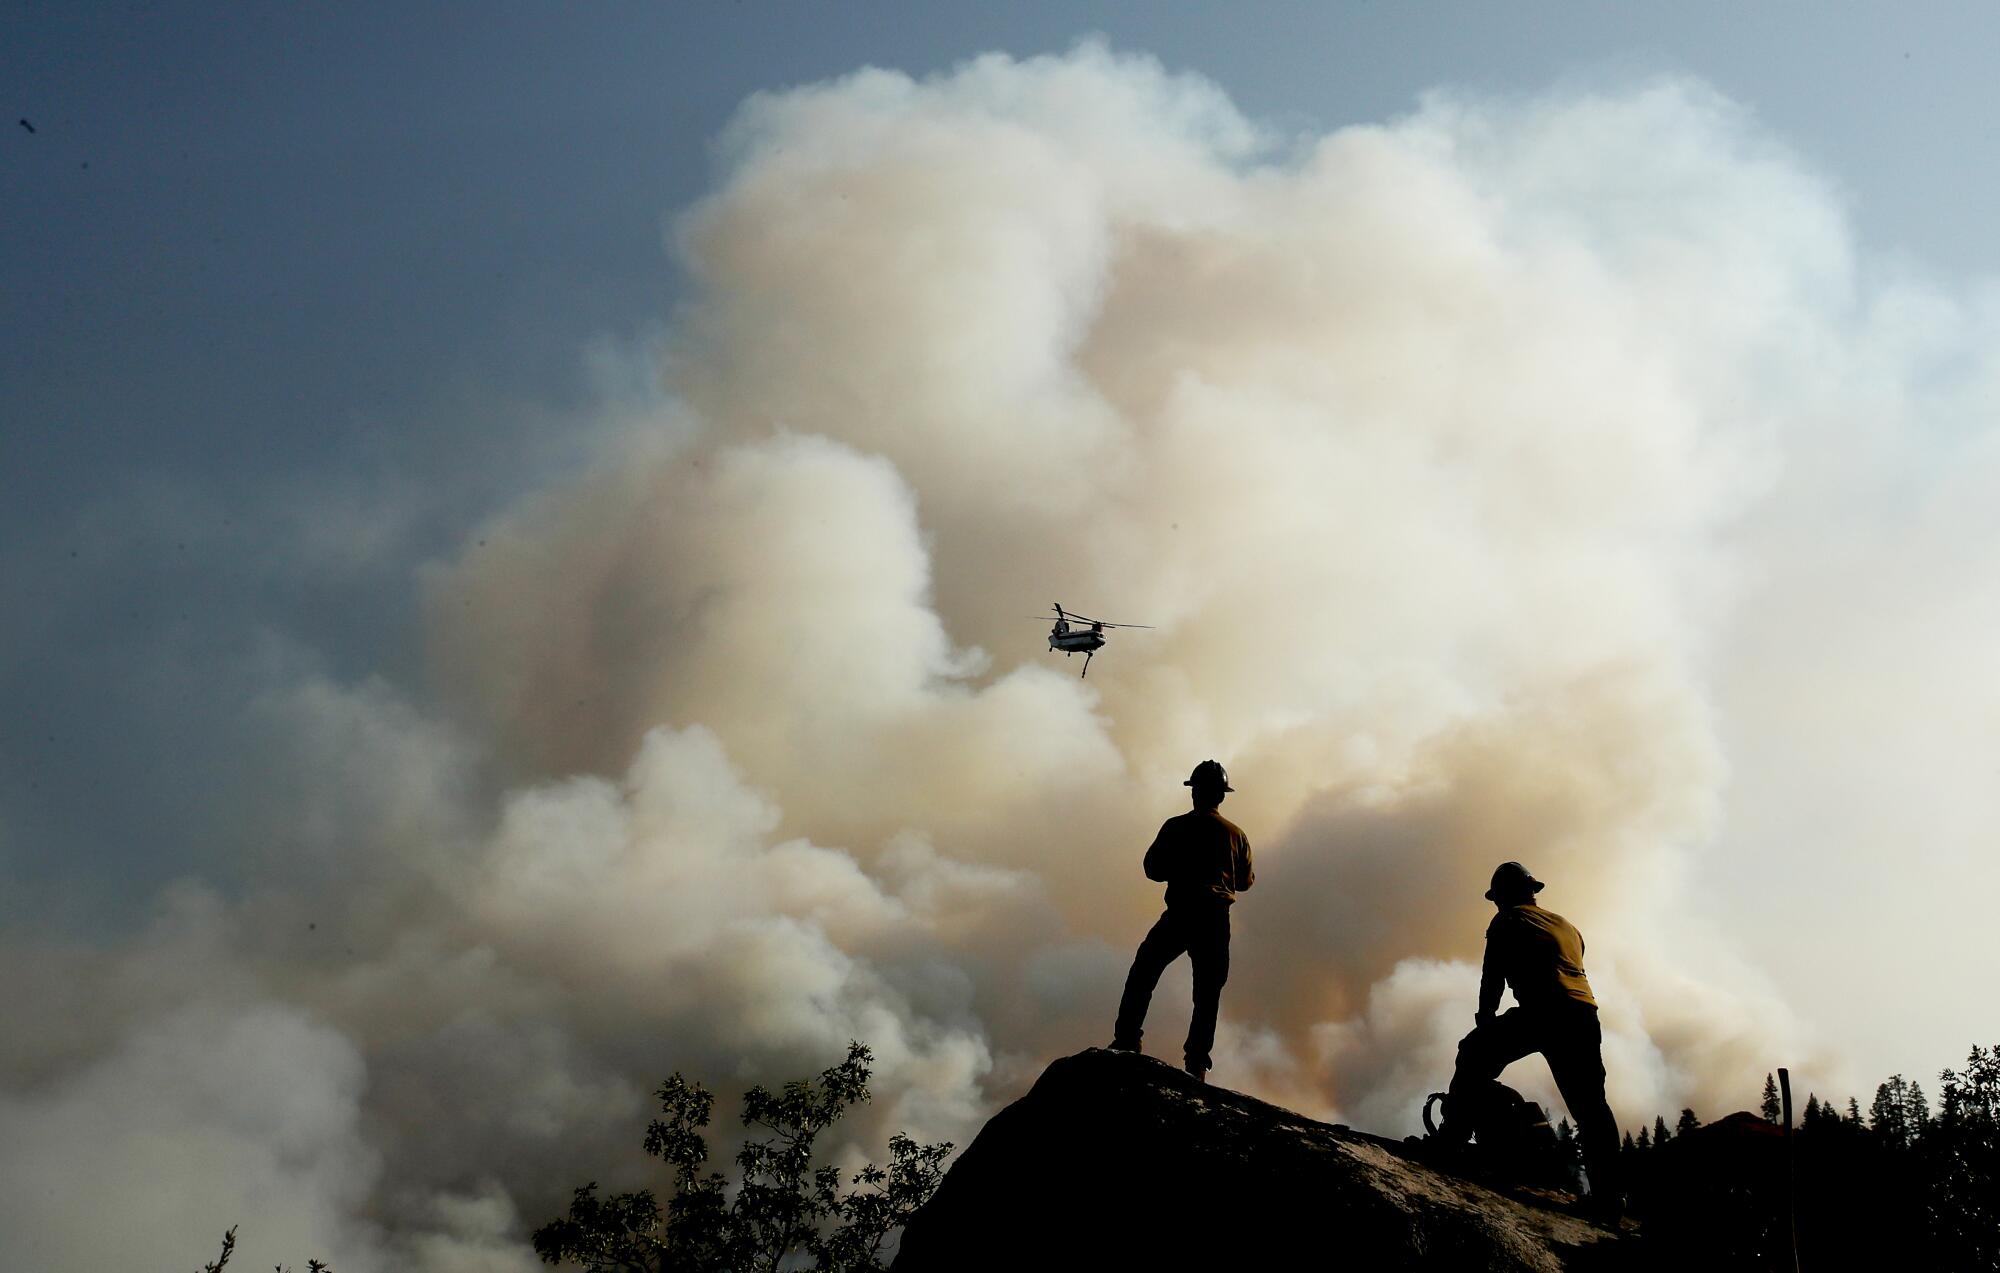 Firefighters watch a helicopter battle the Dixie fire as it burns through mountainous and forested terrain 